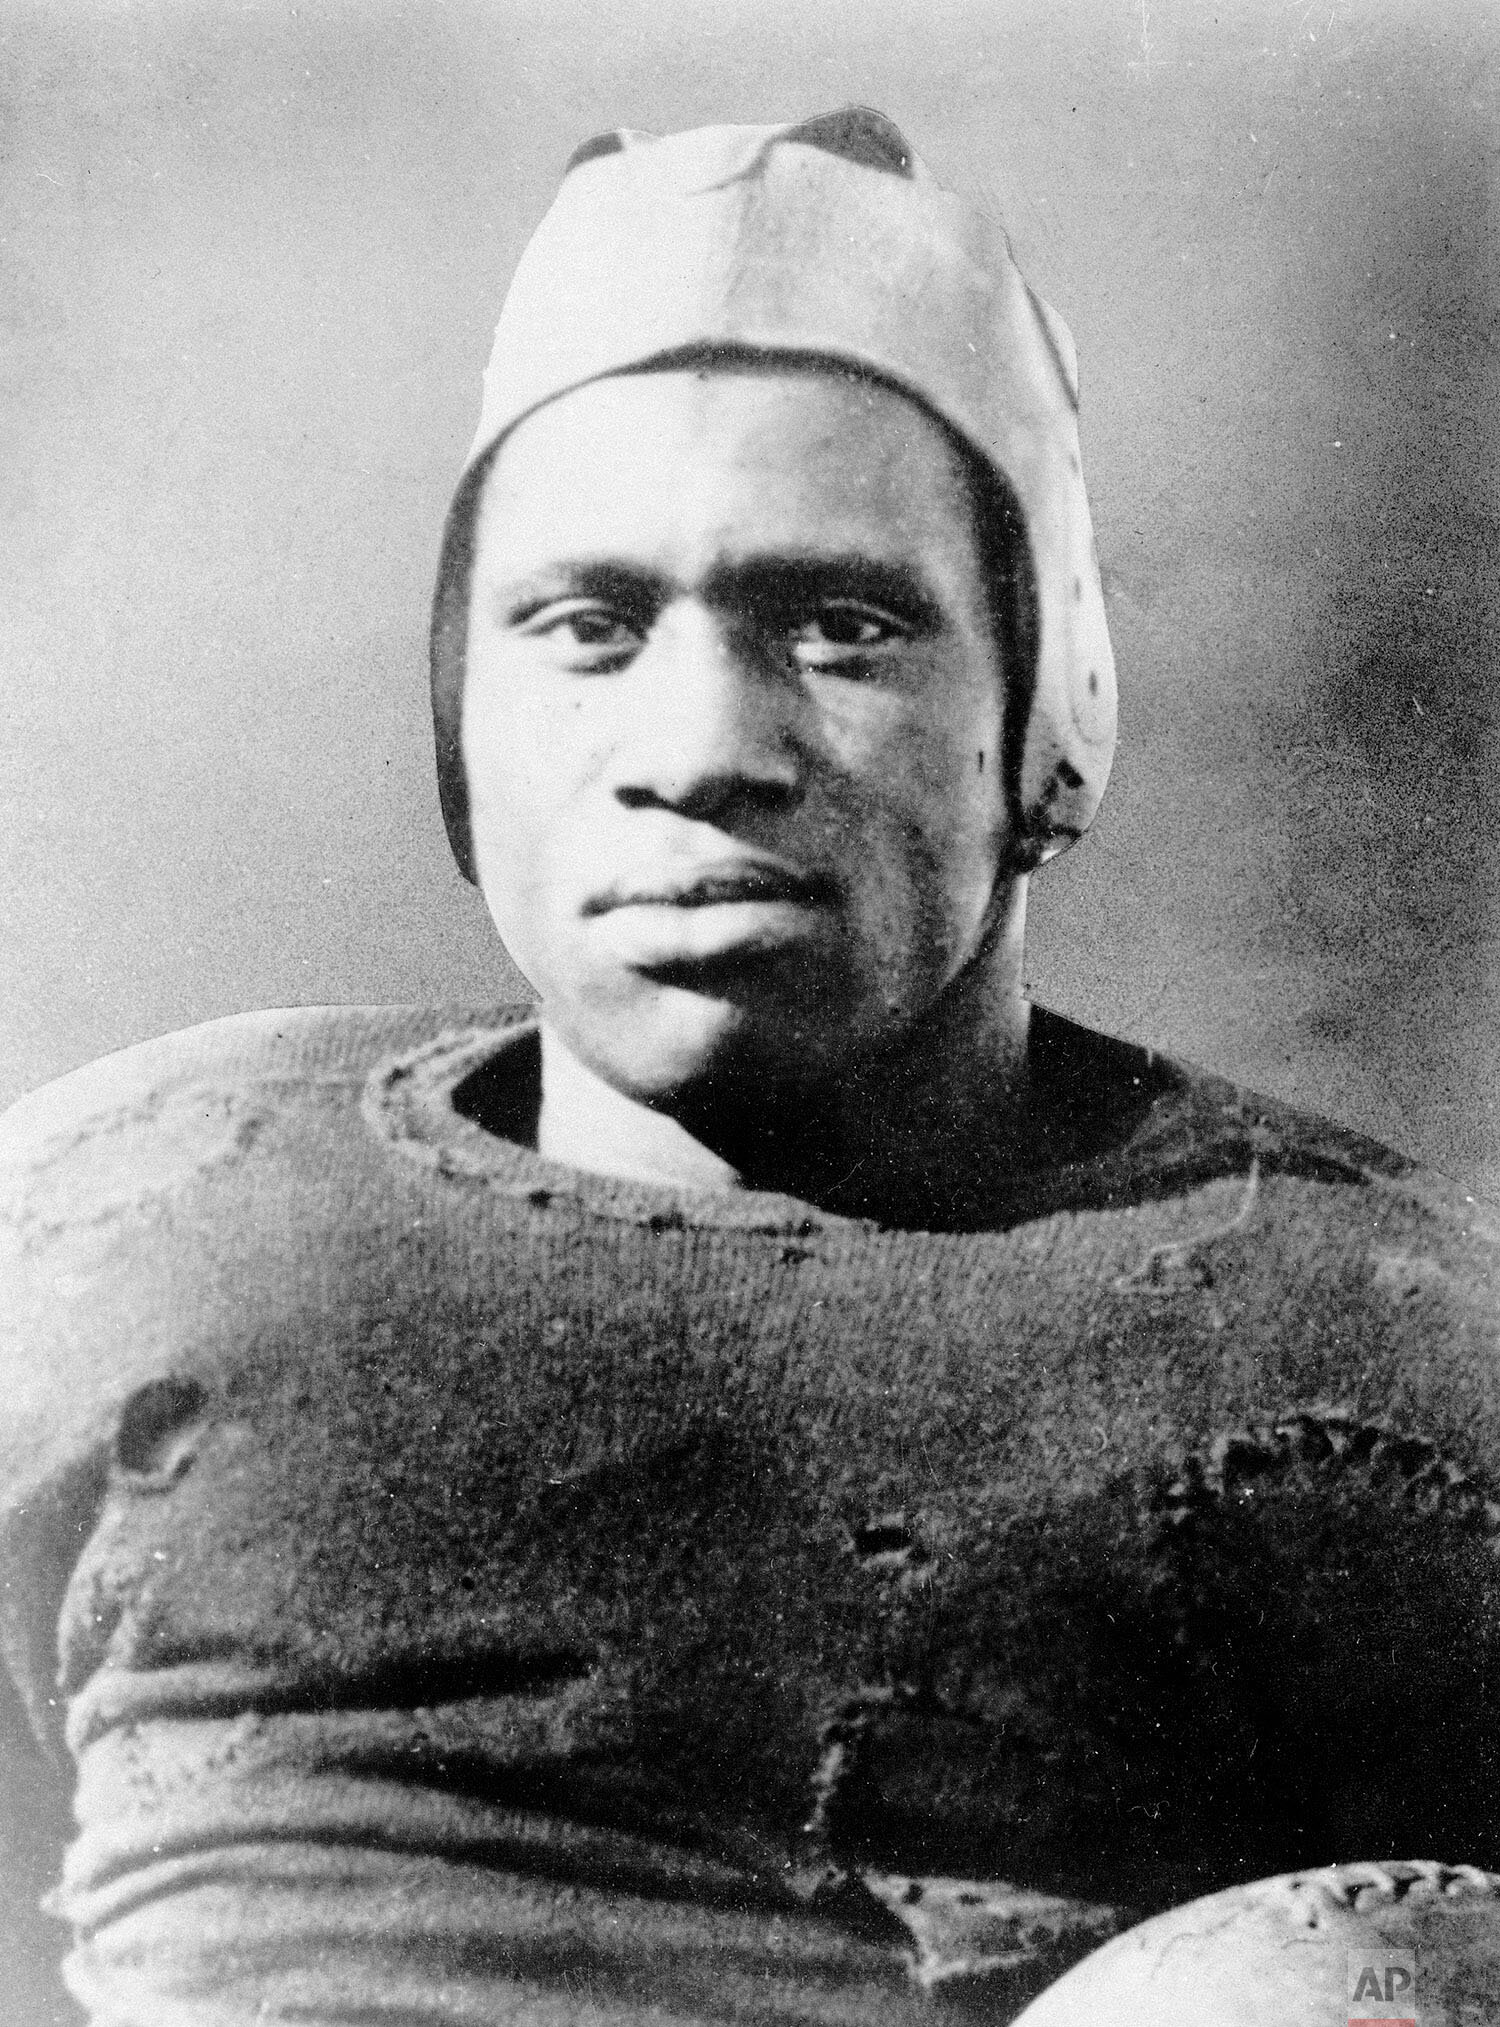  Paul Robeson is seen as an all-American football player at Rutgers University, New Brunswick, N.J., 1917.  (AP Photo) 